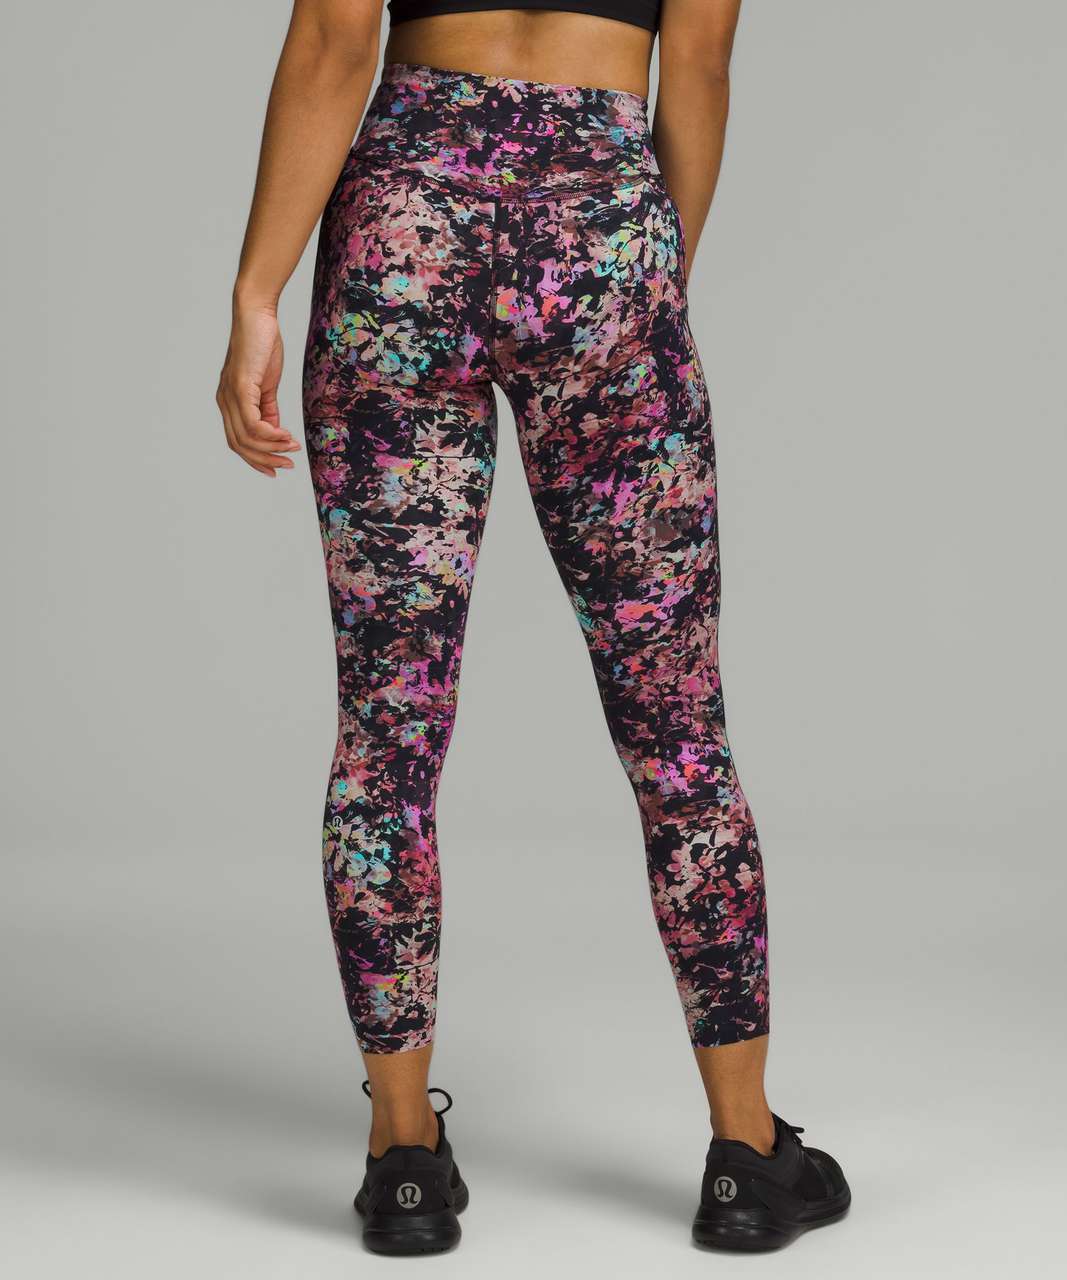 Lululemon Base Pace High-Rise Tight 25" - Stencil Blossom Red Multi